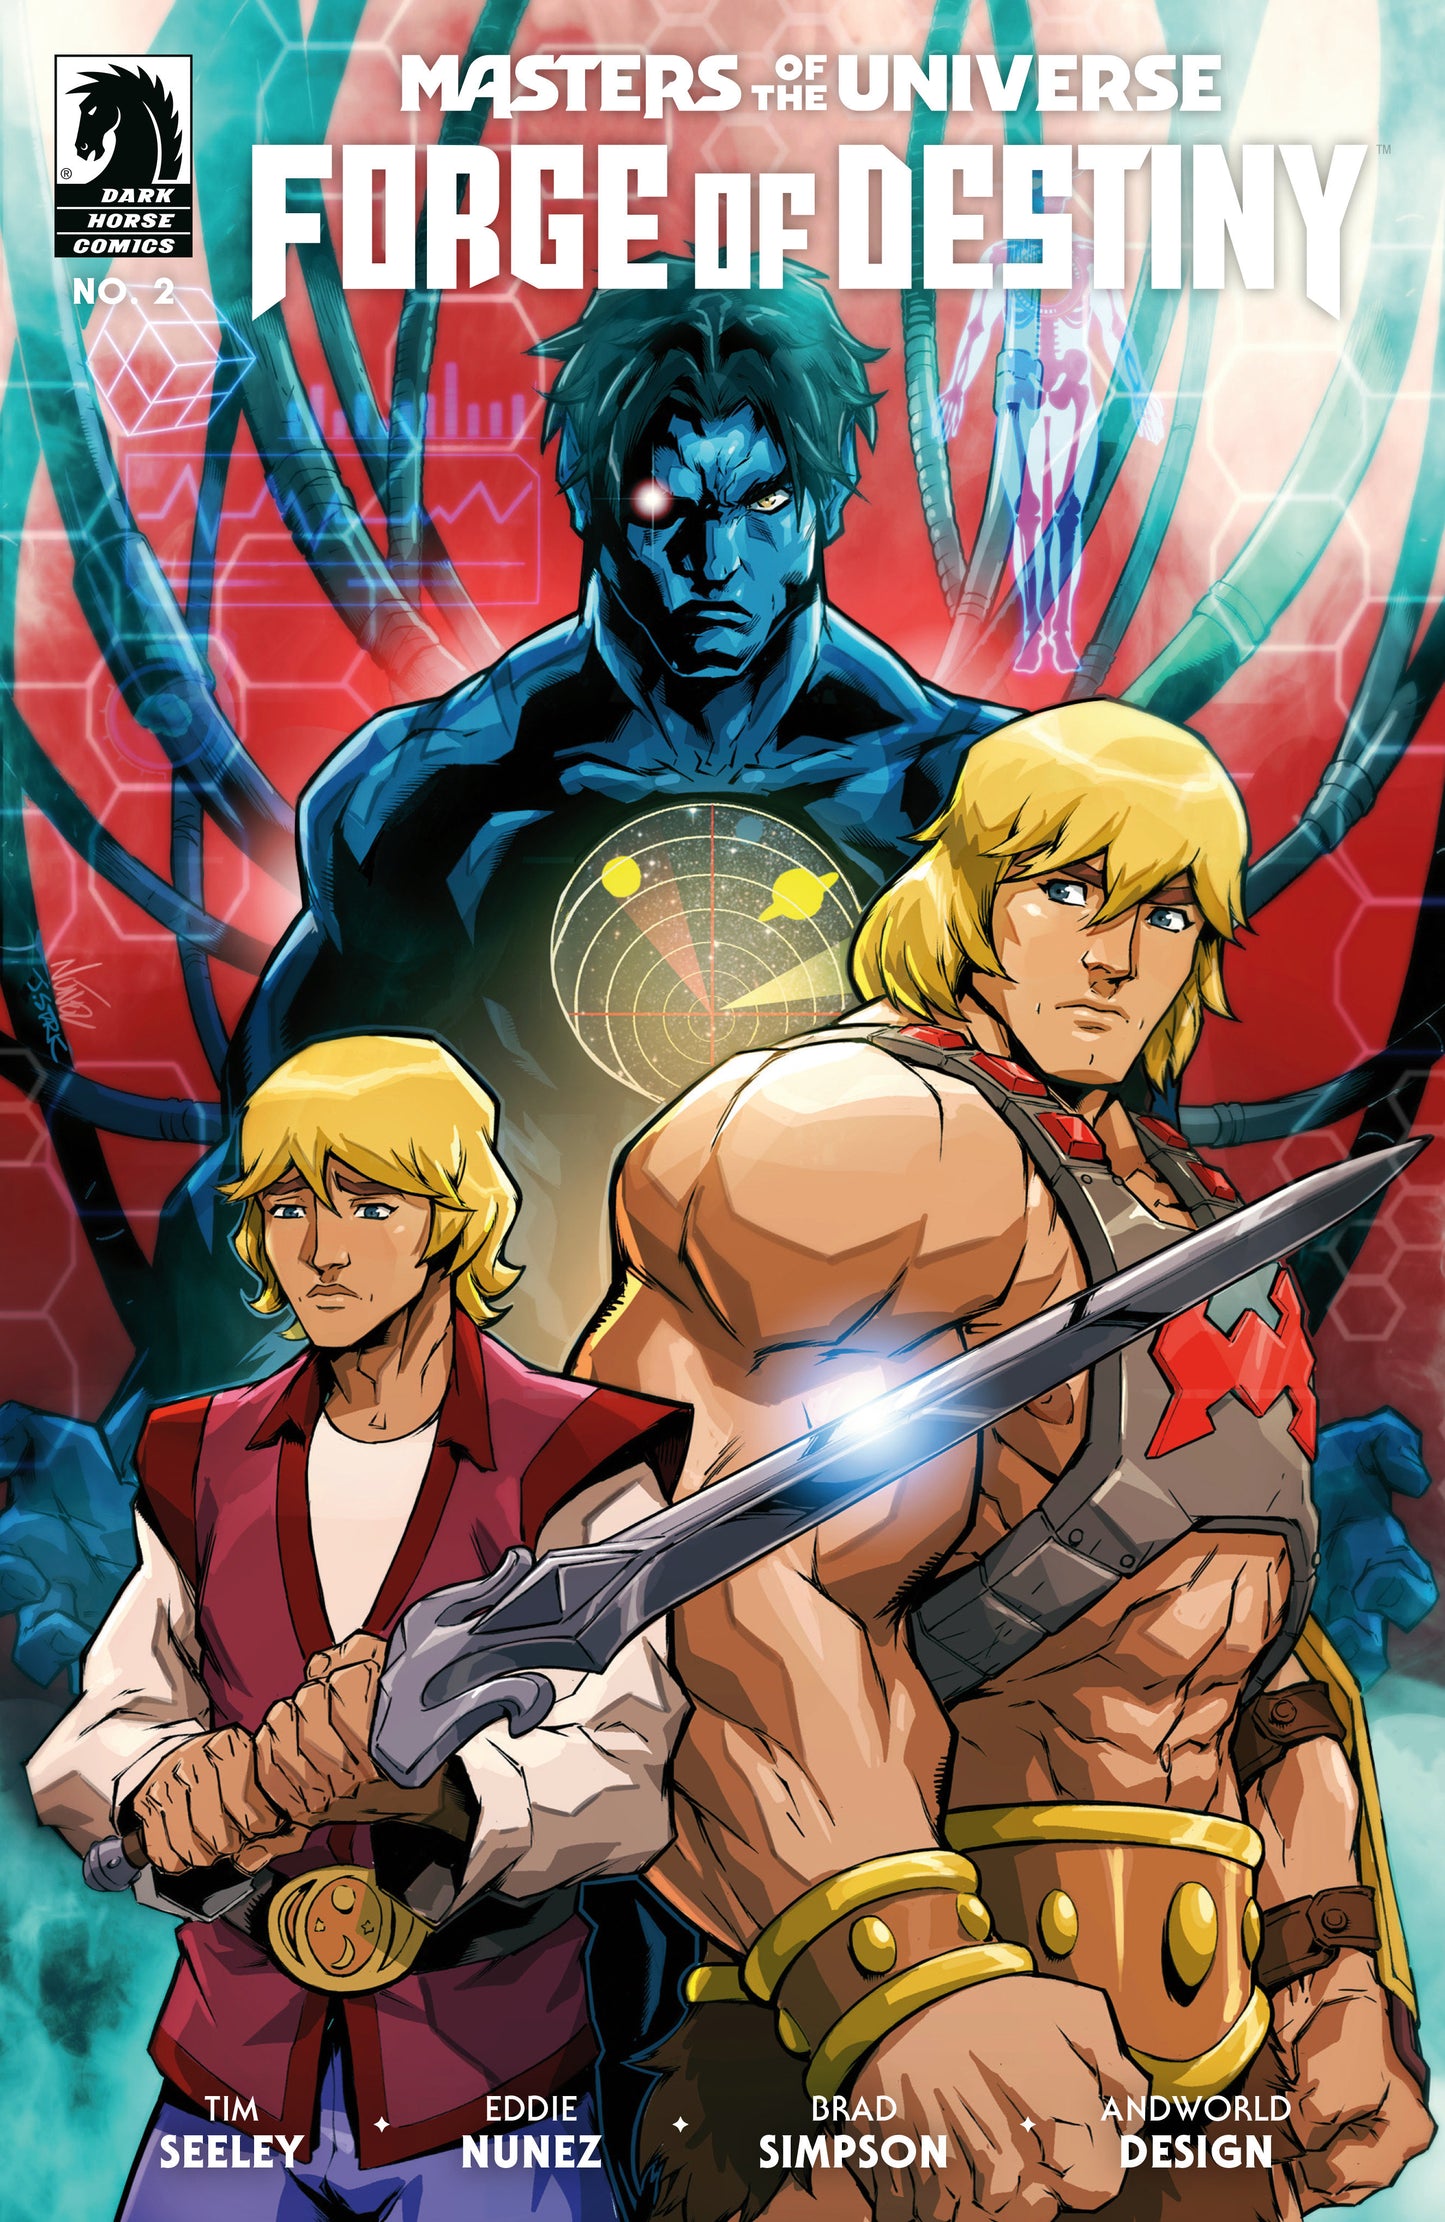 Masters Of The Universe: Forge Of Destiny #2 (Cover A) (Eddie Nunez)